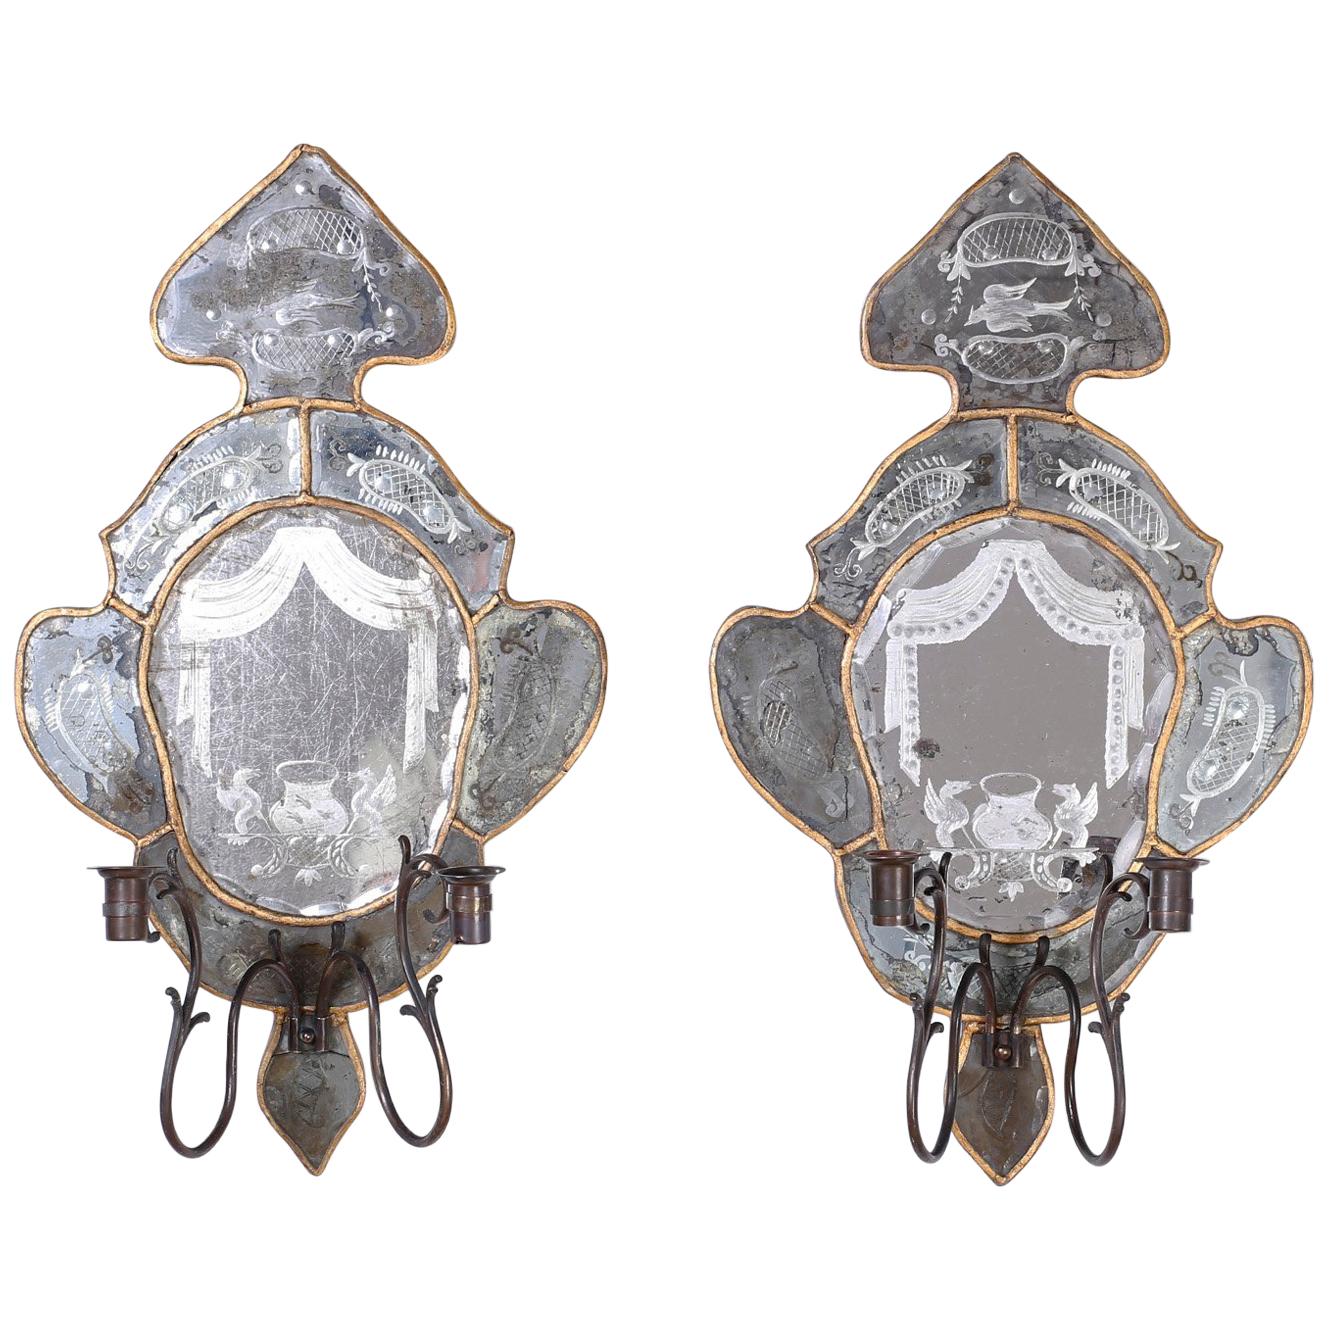 Pair of Antique Venetian Mirrored Wall Sconces